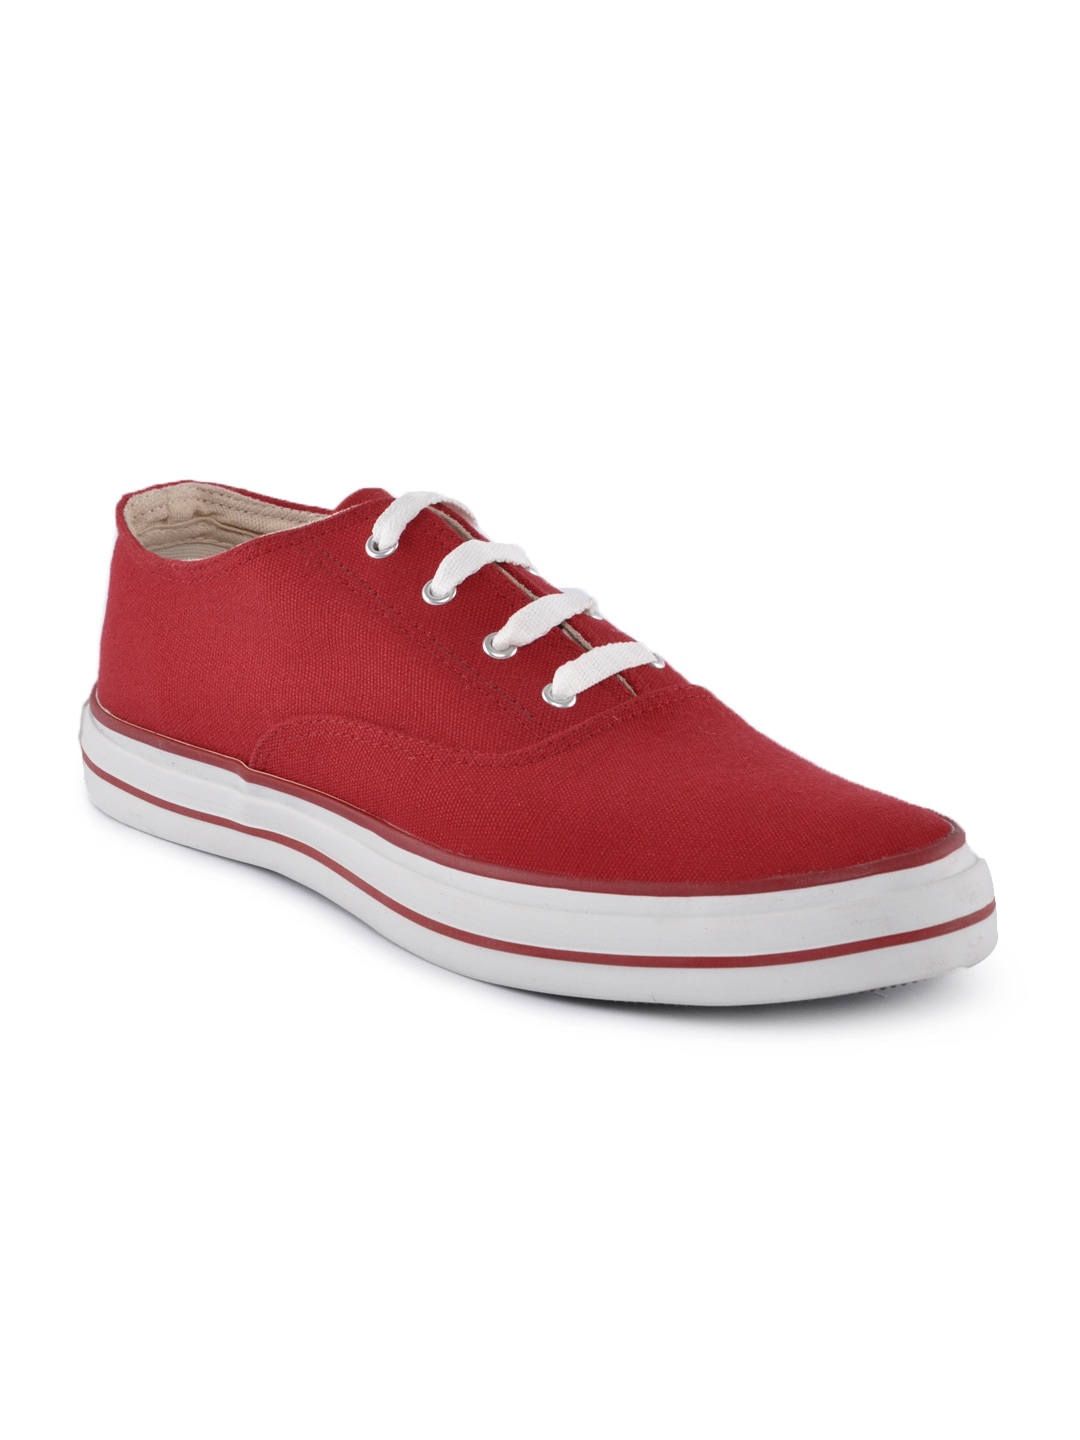 Converse Unisex Oxford Red Casual Shoes